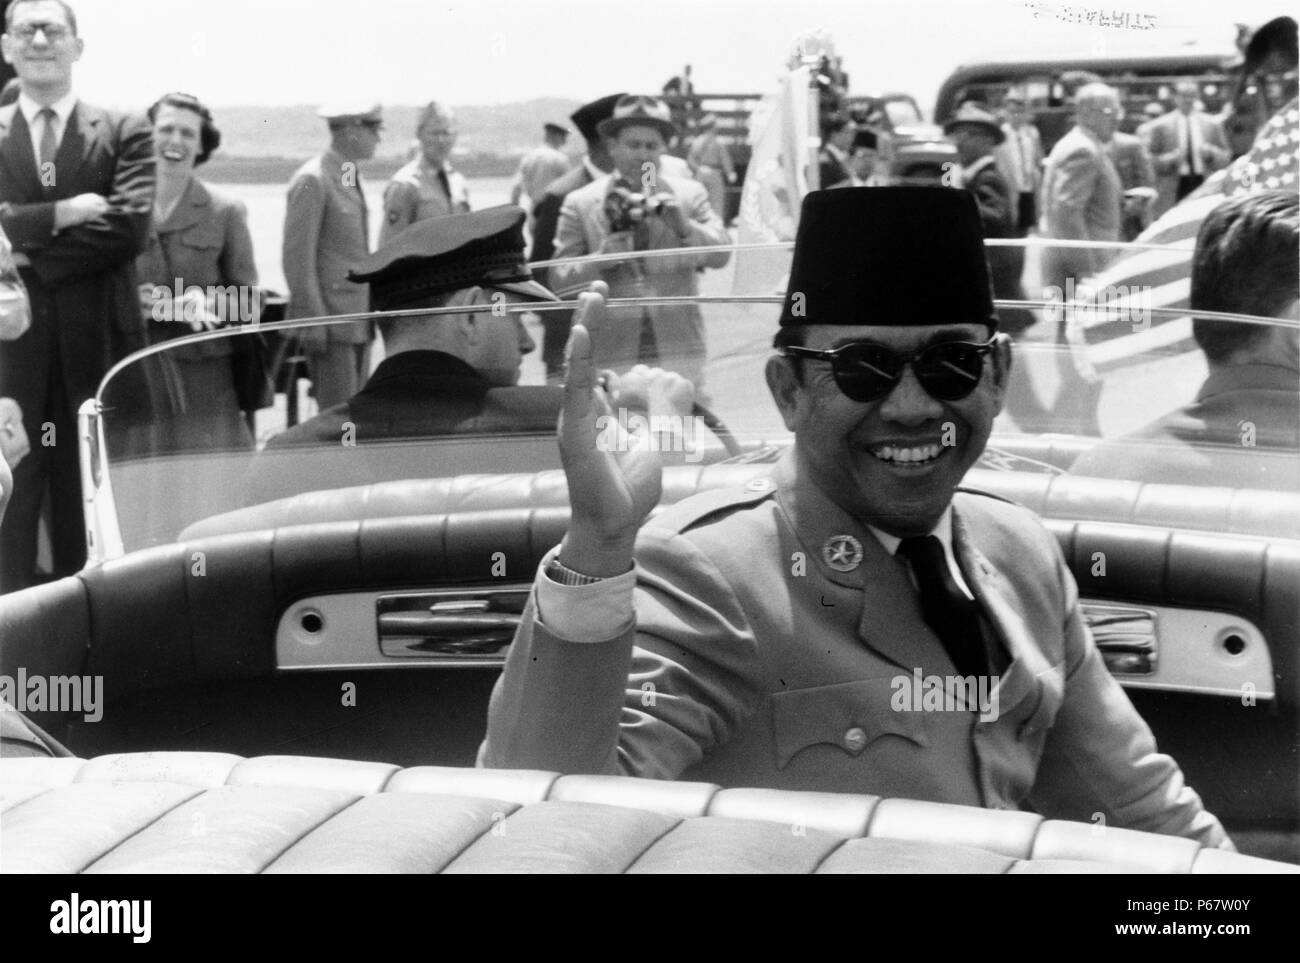 Sukarno in Washington DC. Sukarno was the first President of Indonesia. He was the leader of his country's struggle for independence from the Netherlands and spent over a decade under Dutch detention until he was released by the invading Japanese forces. Stock Photo